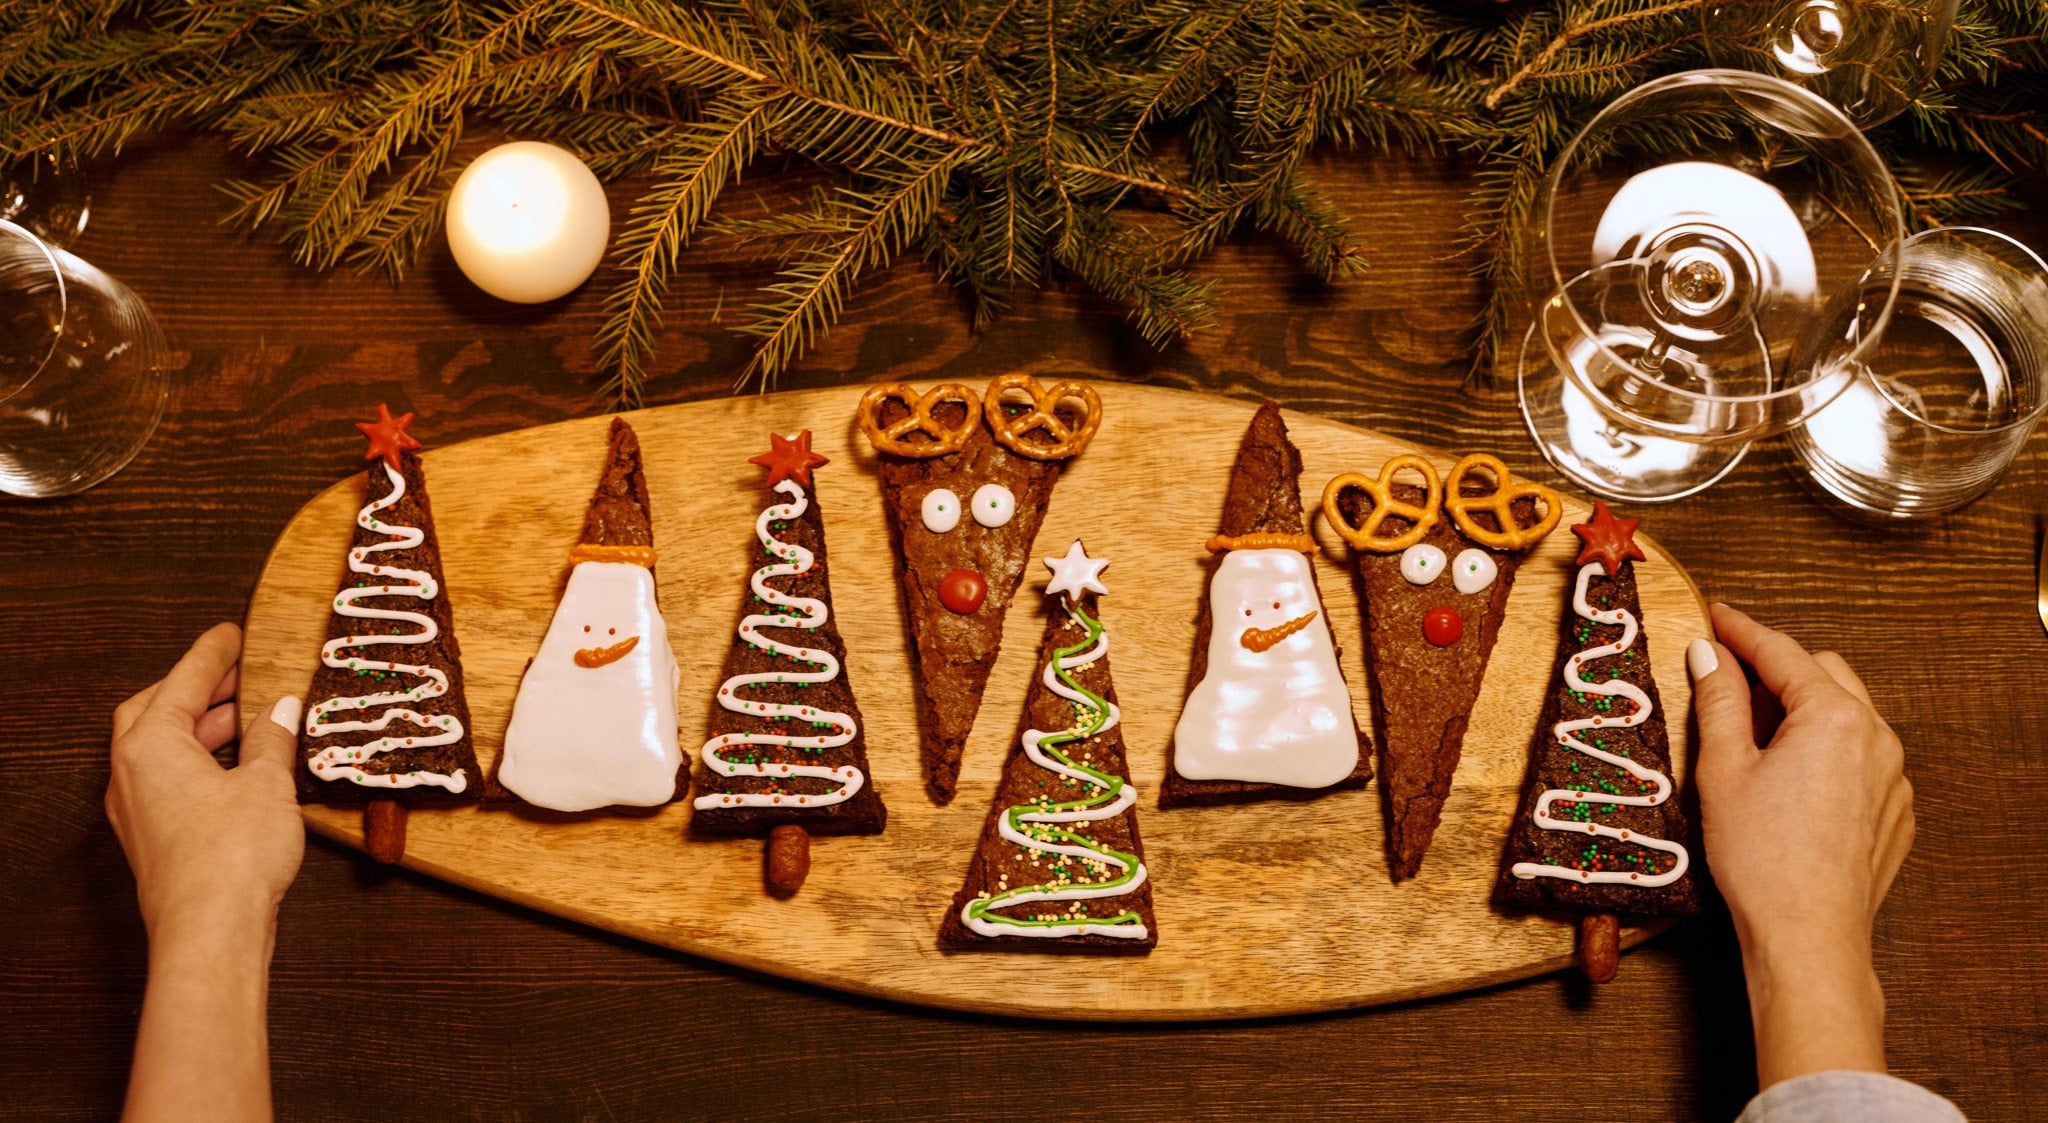 Platters with Christmas tree ornaments